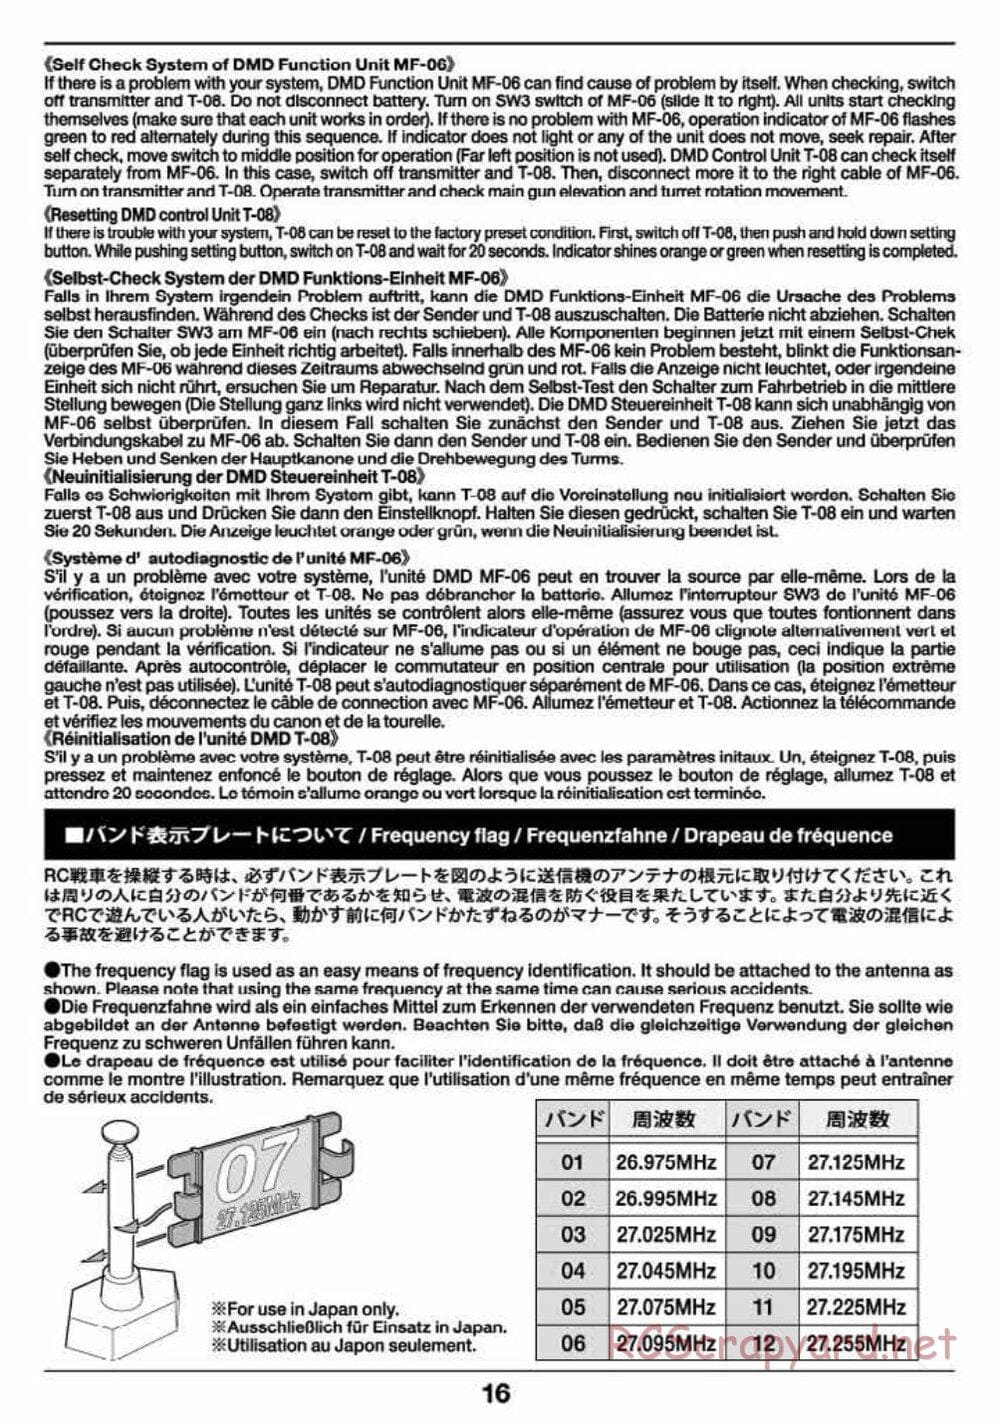 Tamiya - Russian Heavy Tank KV-2 Gigant - 1/16 Scale Chassis - Operation Manual - Page 16